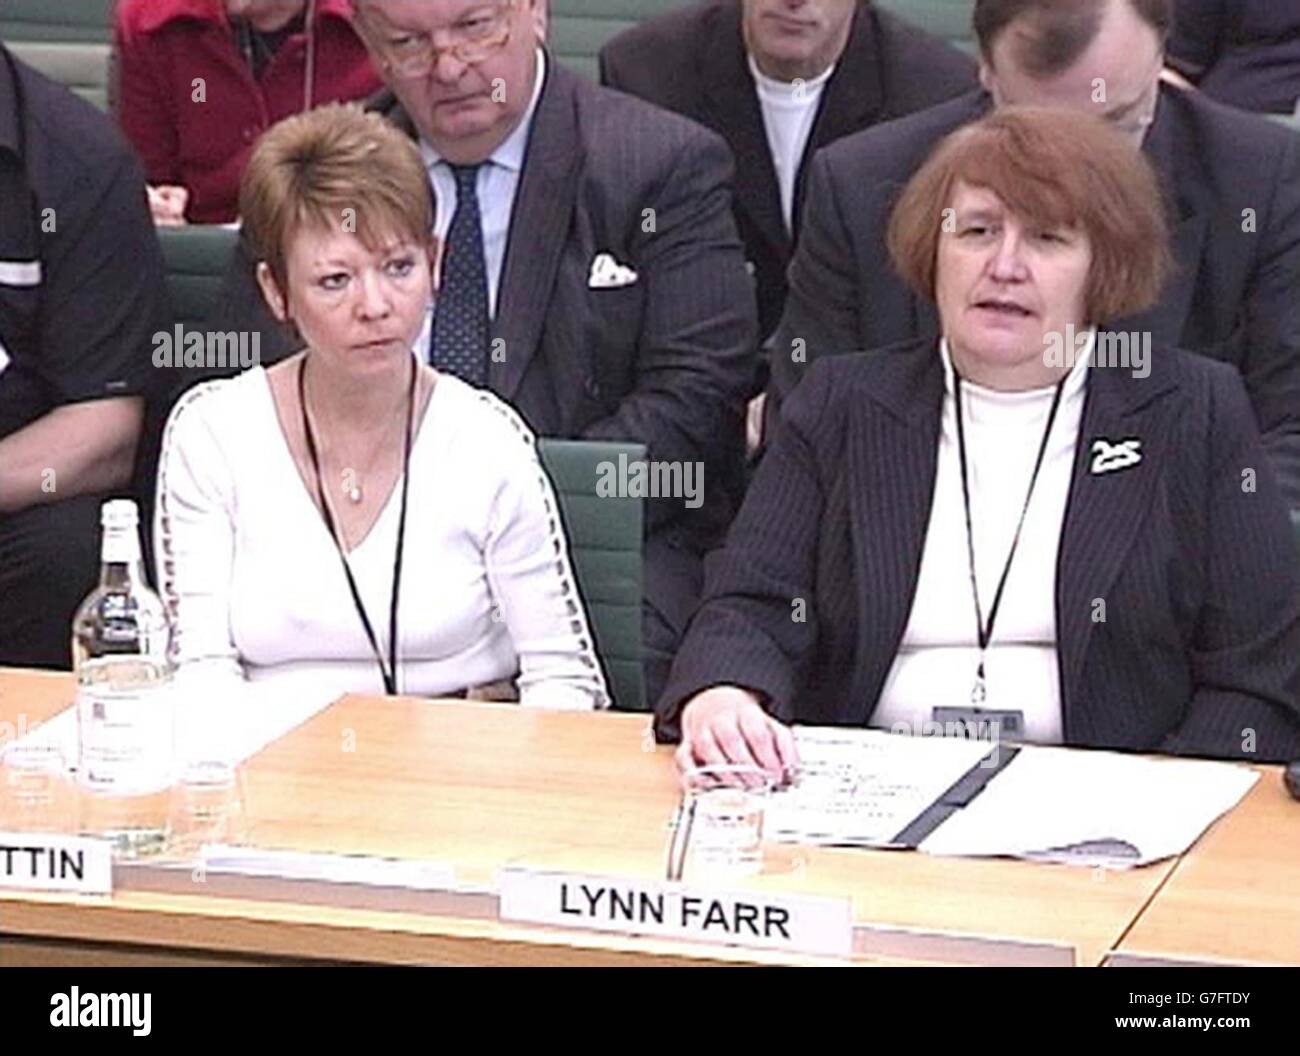 Janet Mattin (left to right) and Claudia Beckley-Lines, parents of soldiers who died at the controversial Deepcut barracks give evidence to the House of Common's defence committe in London as they step up their demands for a public inquiry. The Government yesterday announced a new review of allegations of abuse and bullying at the Army barracks. But is stopped short of the full public inquiry demanded by families and MPs. Four young solders at the Surrey base have died of gunshot wounds in unexplained circumstances. Stock Photo